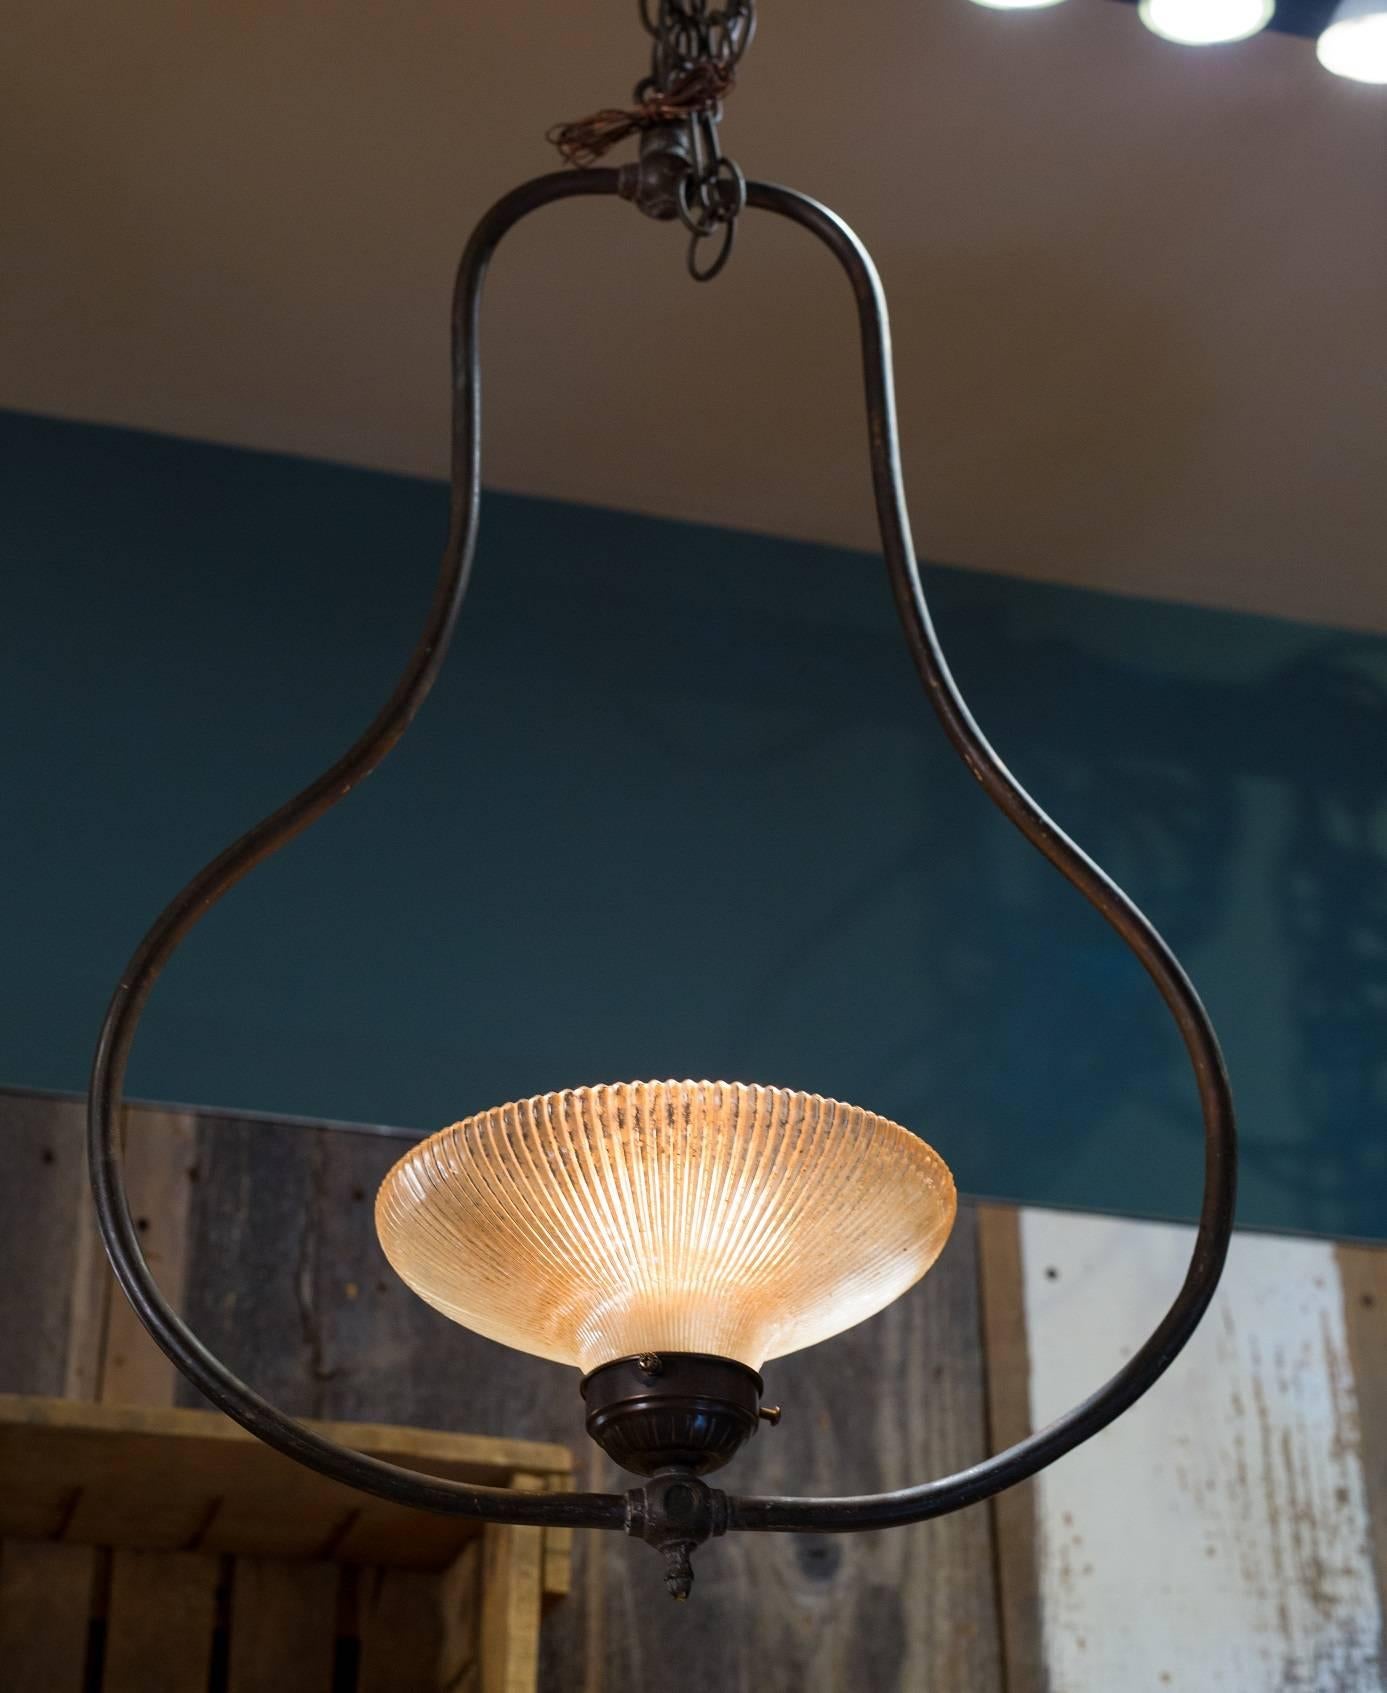 Beautiful, one of a kind pendant with brass body and antique pleated glass shade.  Newly wired in the US with one Edison socket and all UL approved parts. Comes with matching chain and canopy.